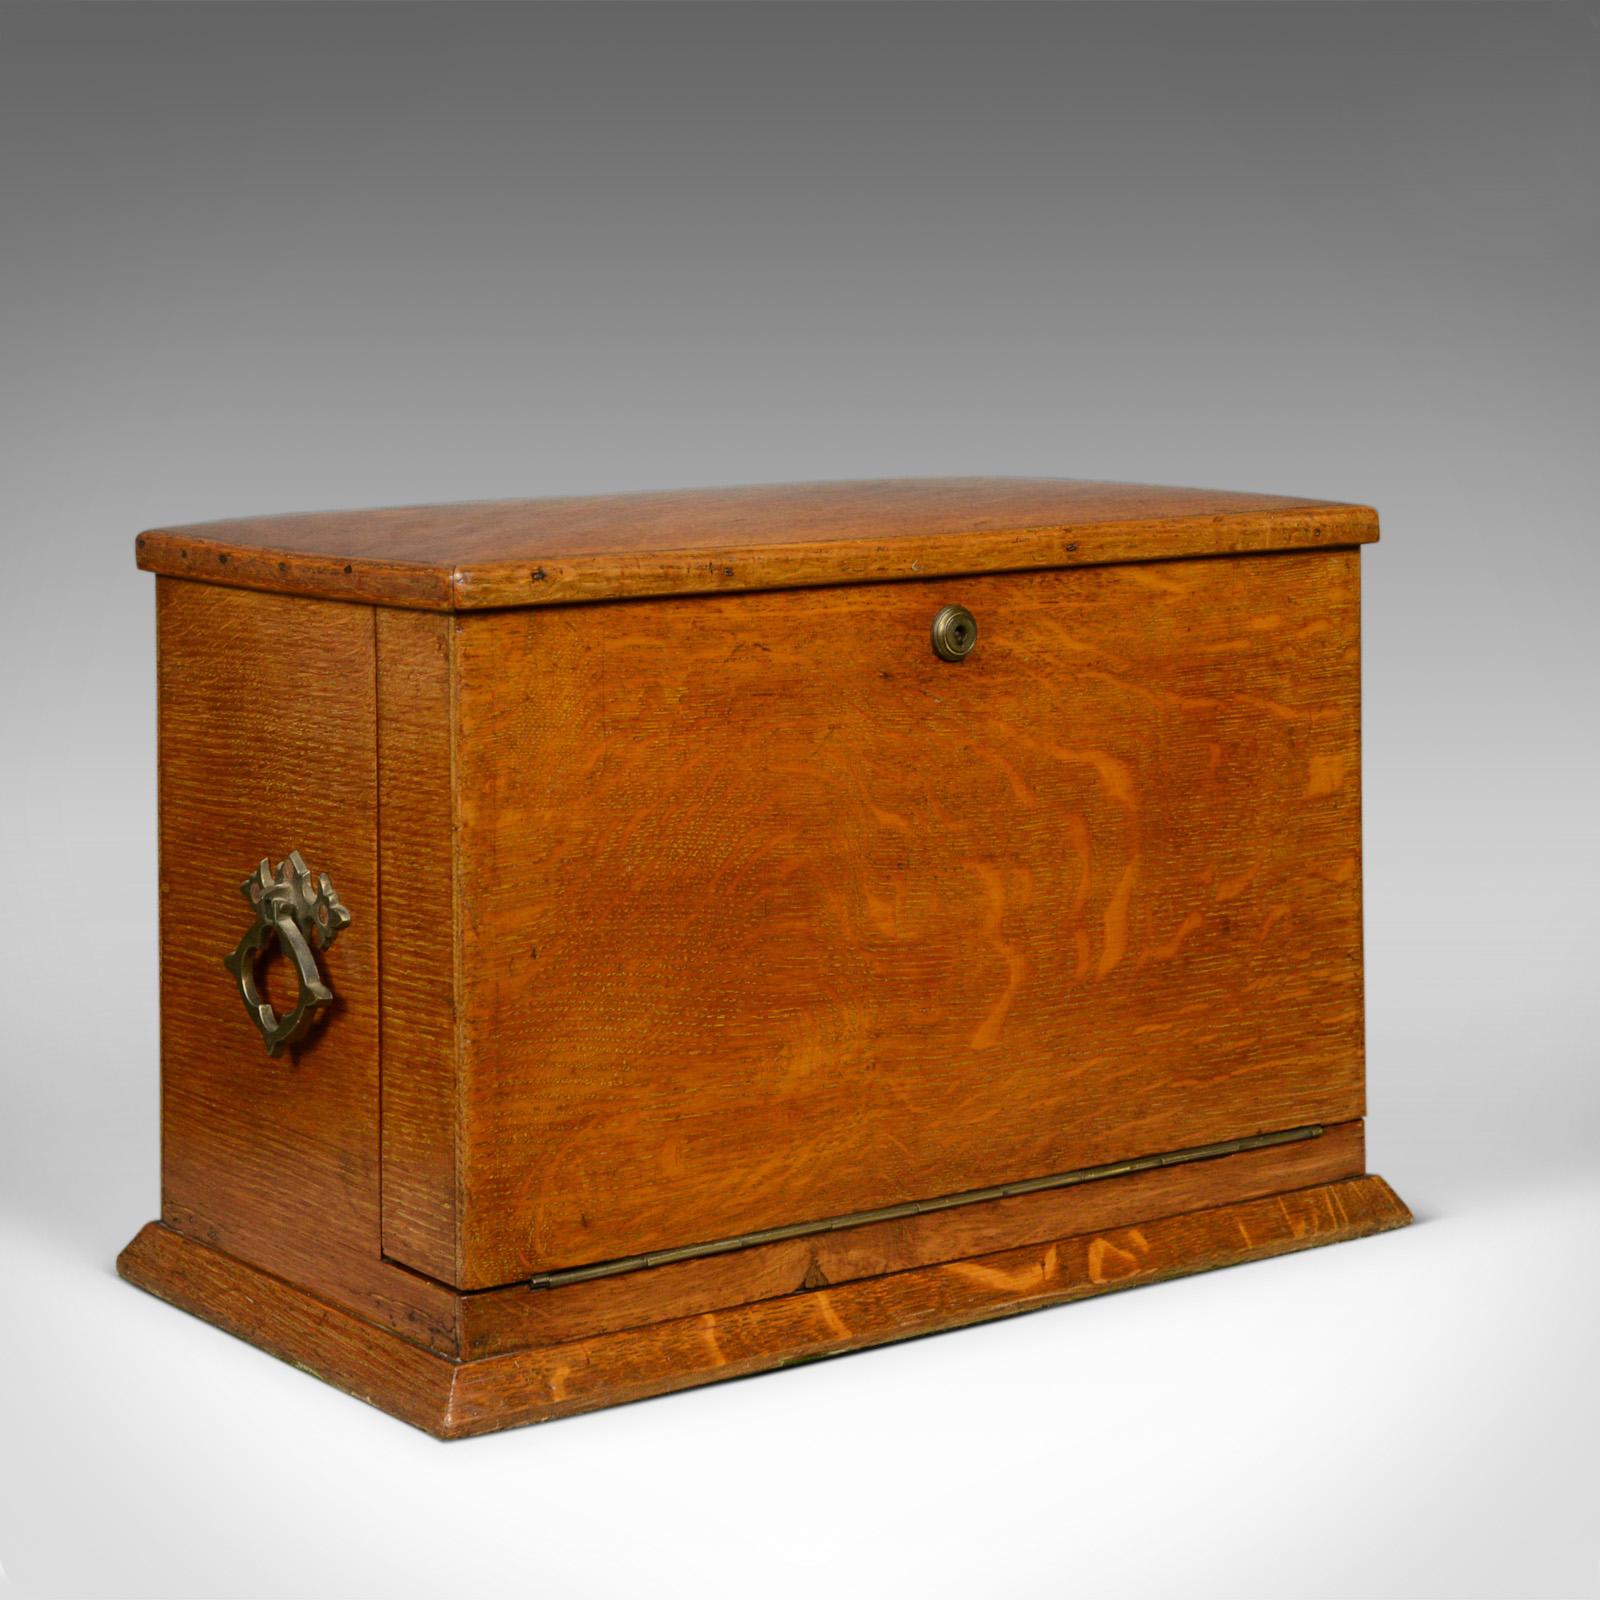 This is an antique Campaign writing box. An English, Victorian, oak stationery, correspondence case dating to the late 19th century, more specifically December 25th, 1887.

A superior Campaign writing box
In fine English oak displaying grain